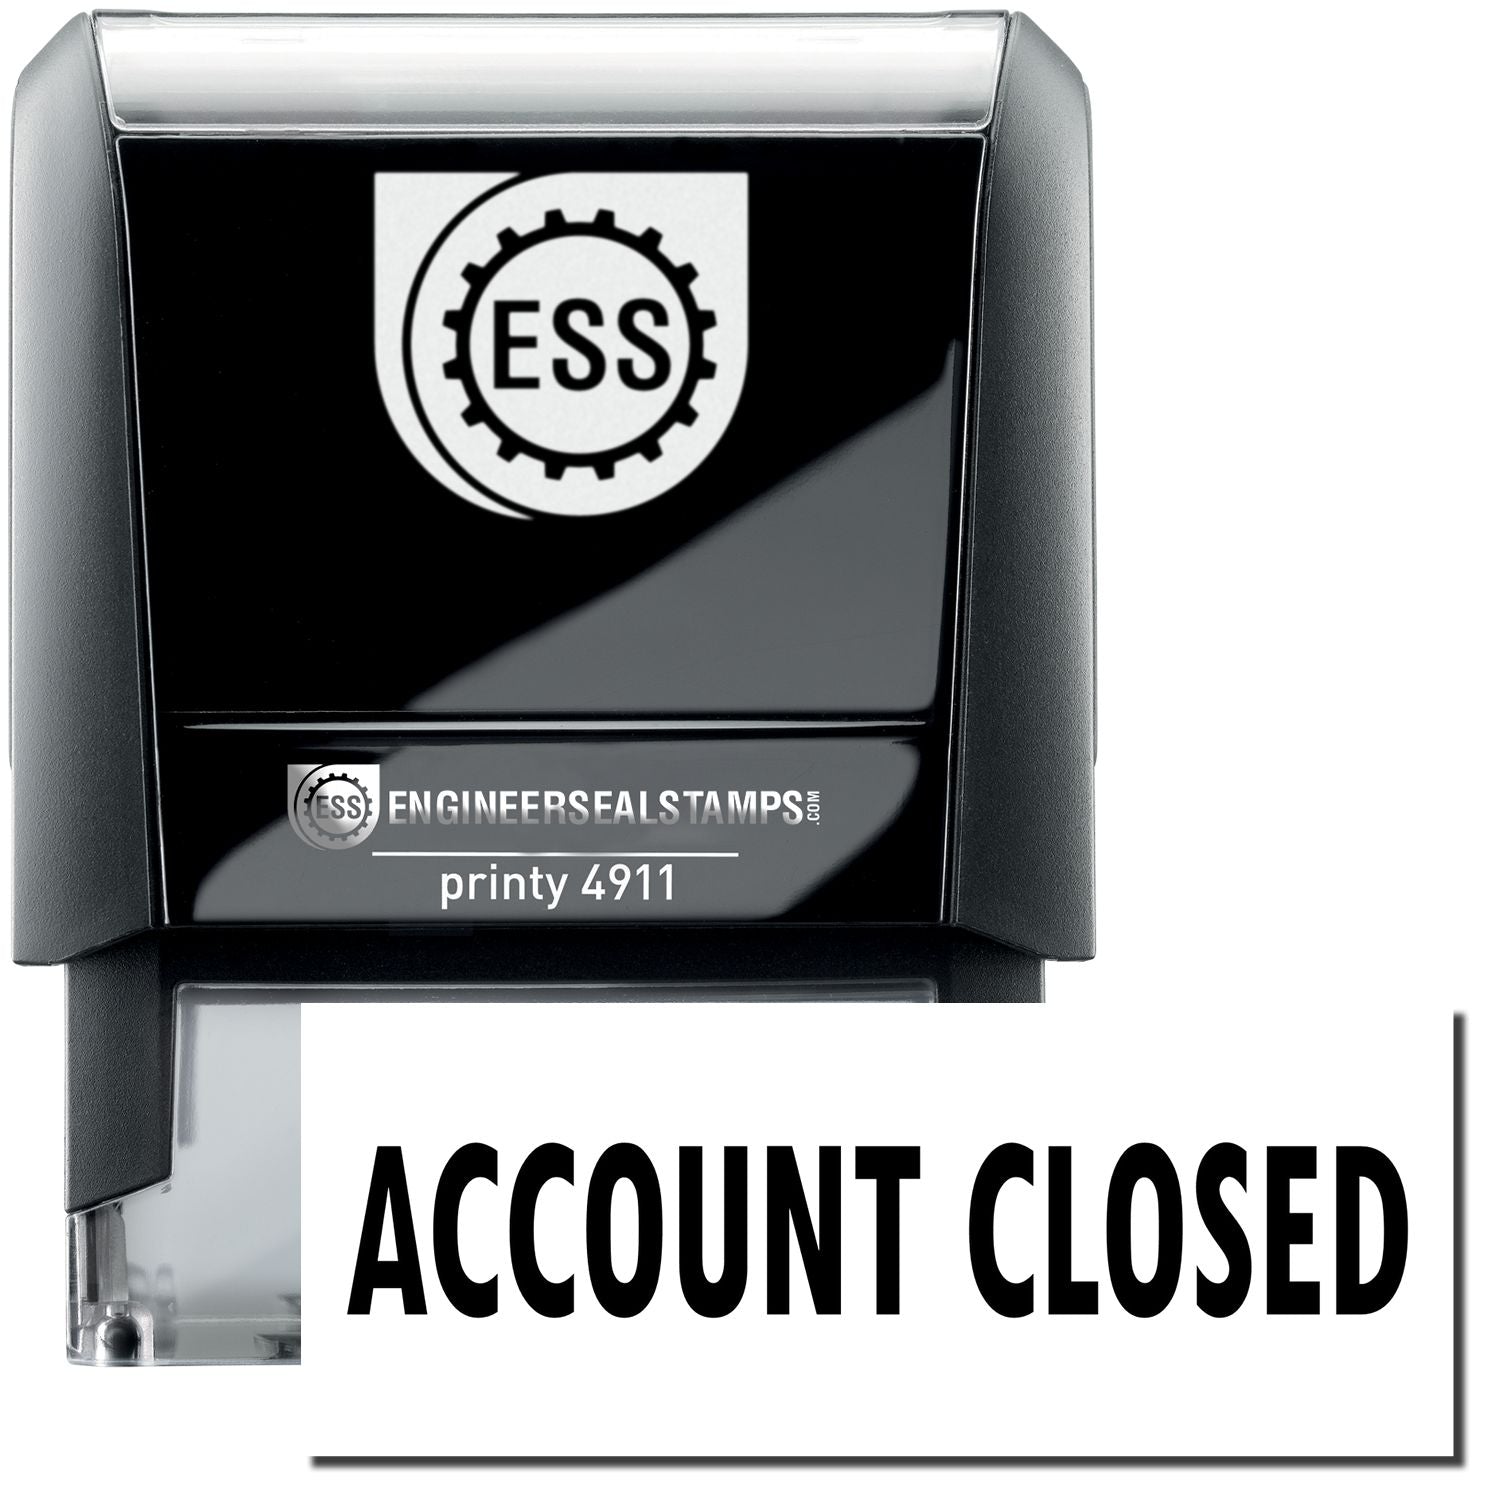 A self-inking stamp with a stamped image showing how the text "ACCOUNT CLOSED" is displayed after stamping.